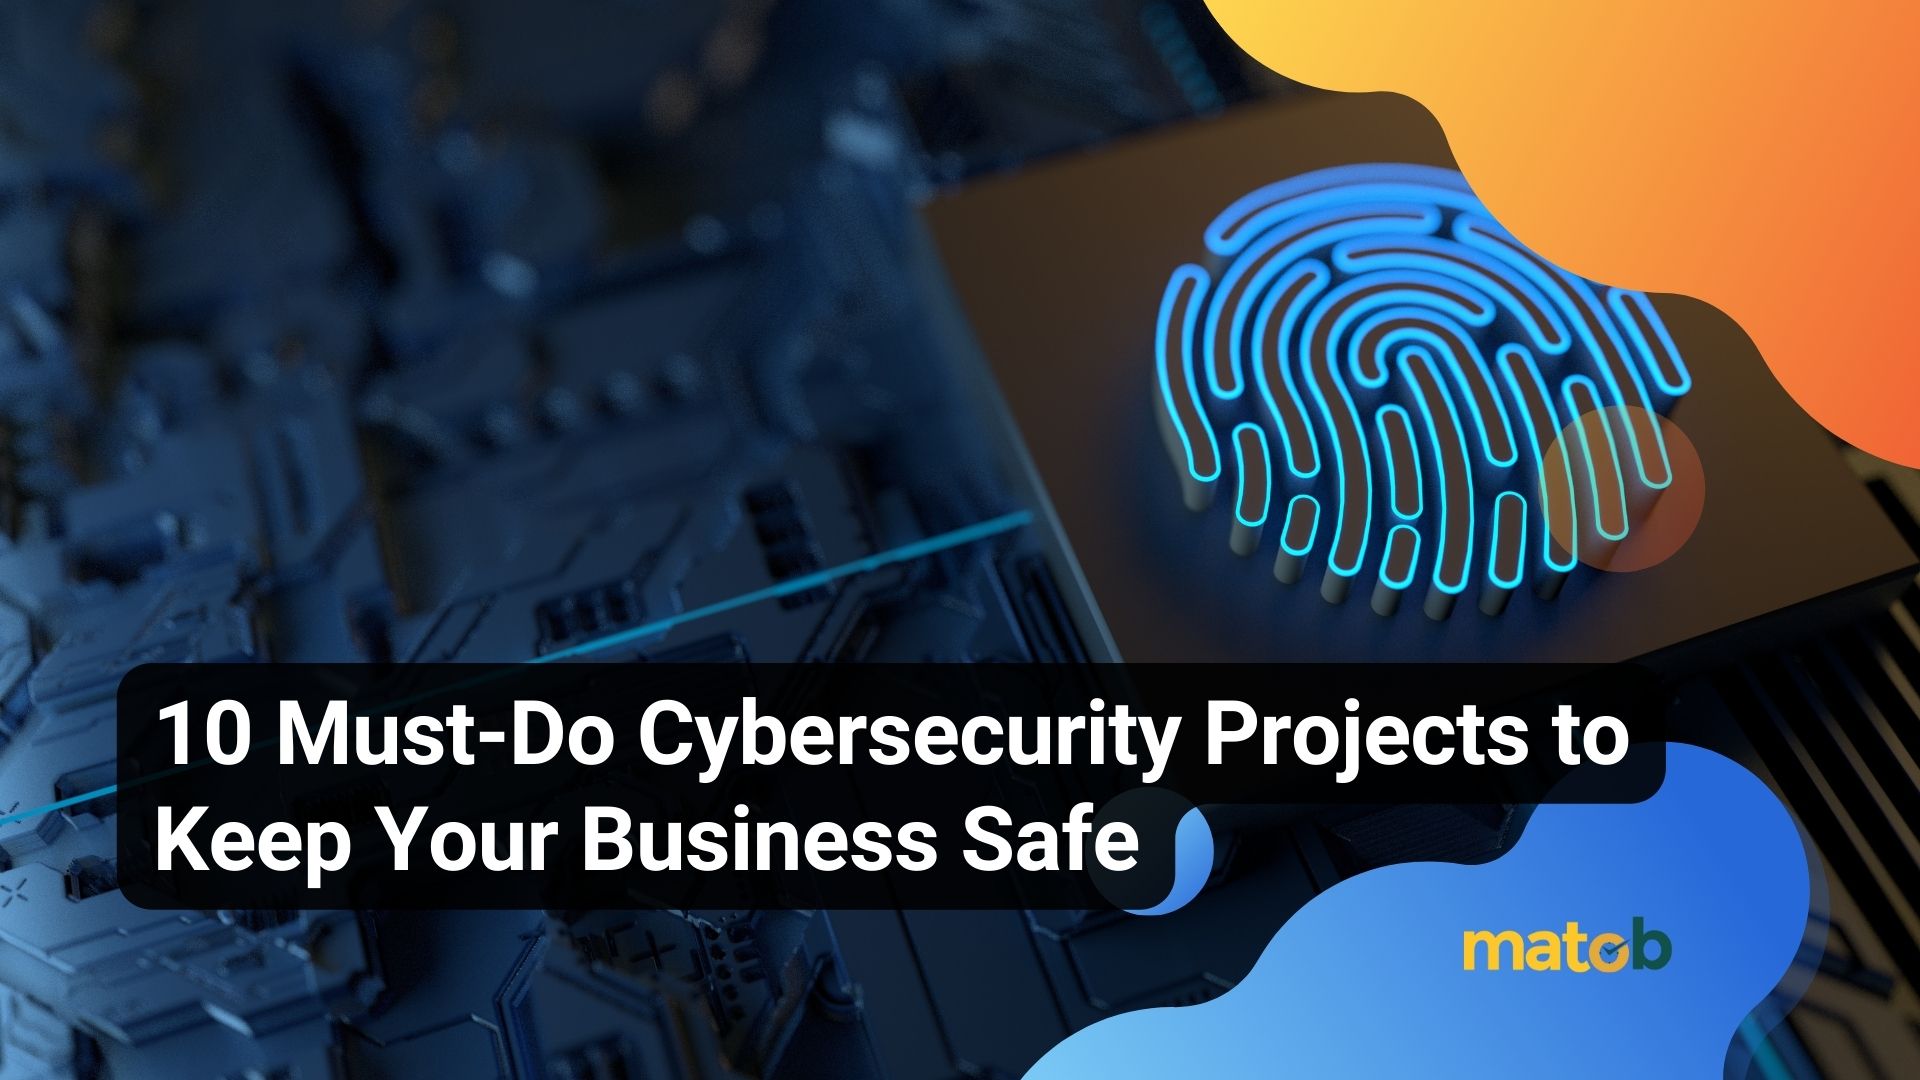 10 Must-Do Cybersecurity Projects to Keep Your Business Safe